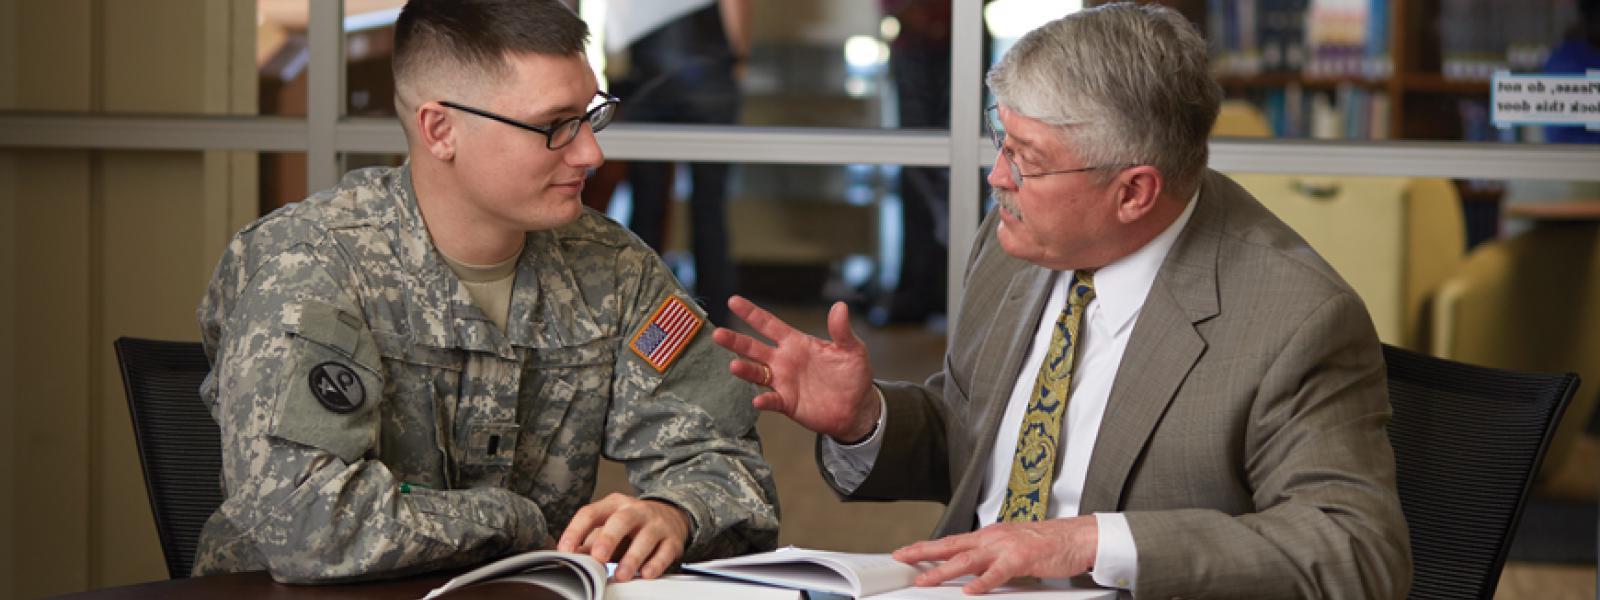 A seminary professor speaking with a military chaplaincy student in an office environment.